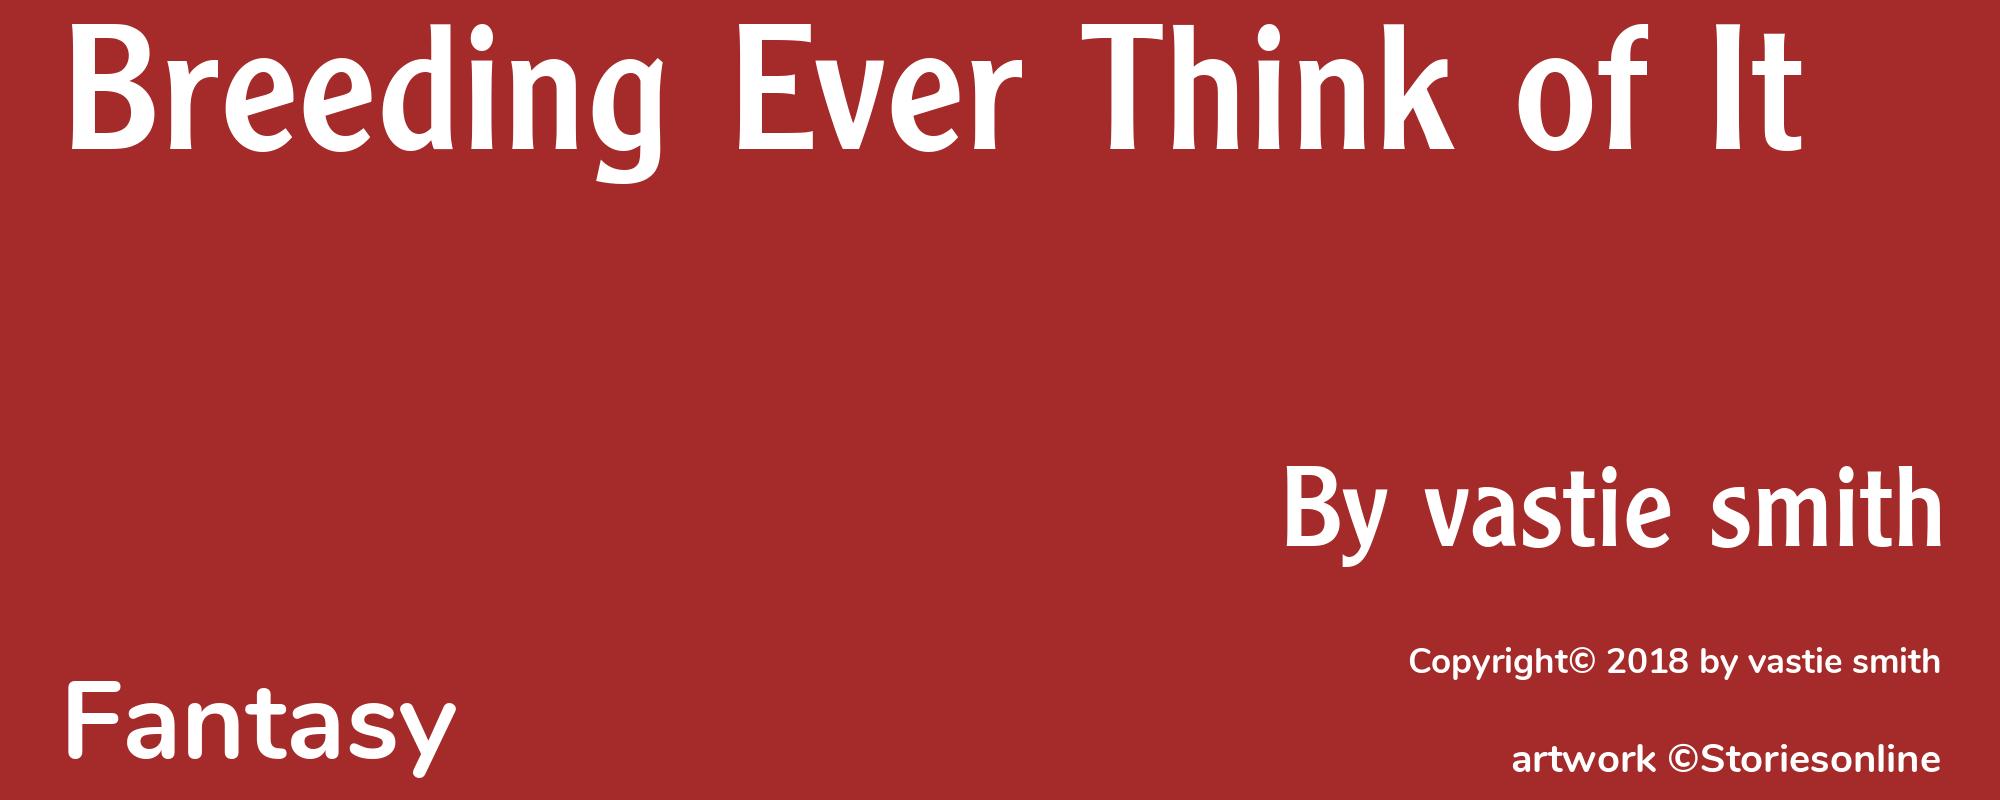 Breeding Ever Think of It - Cover